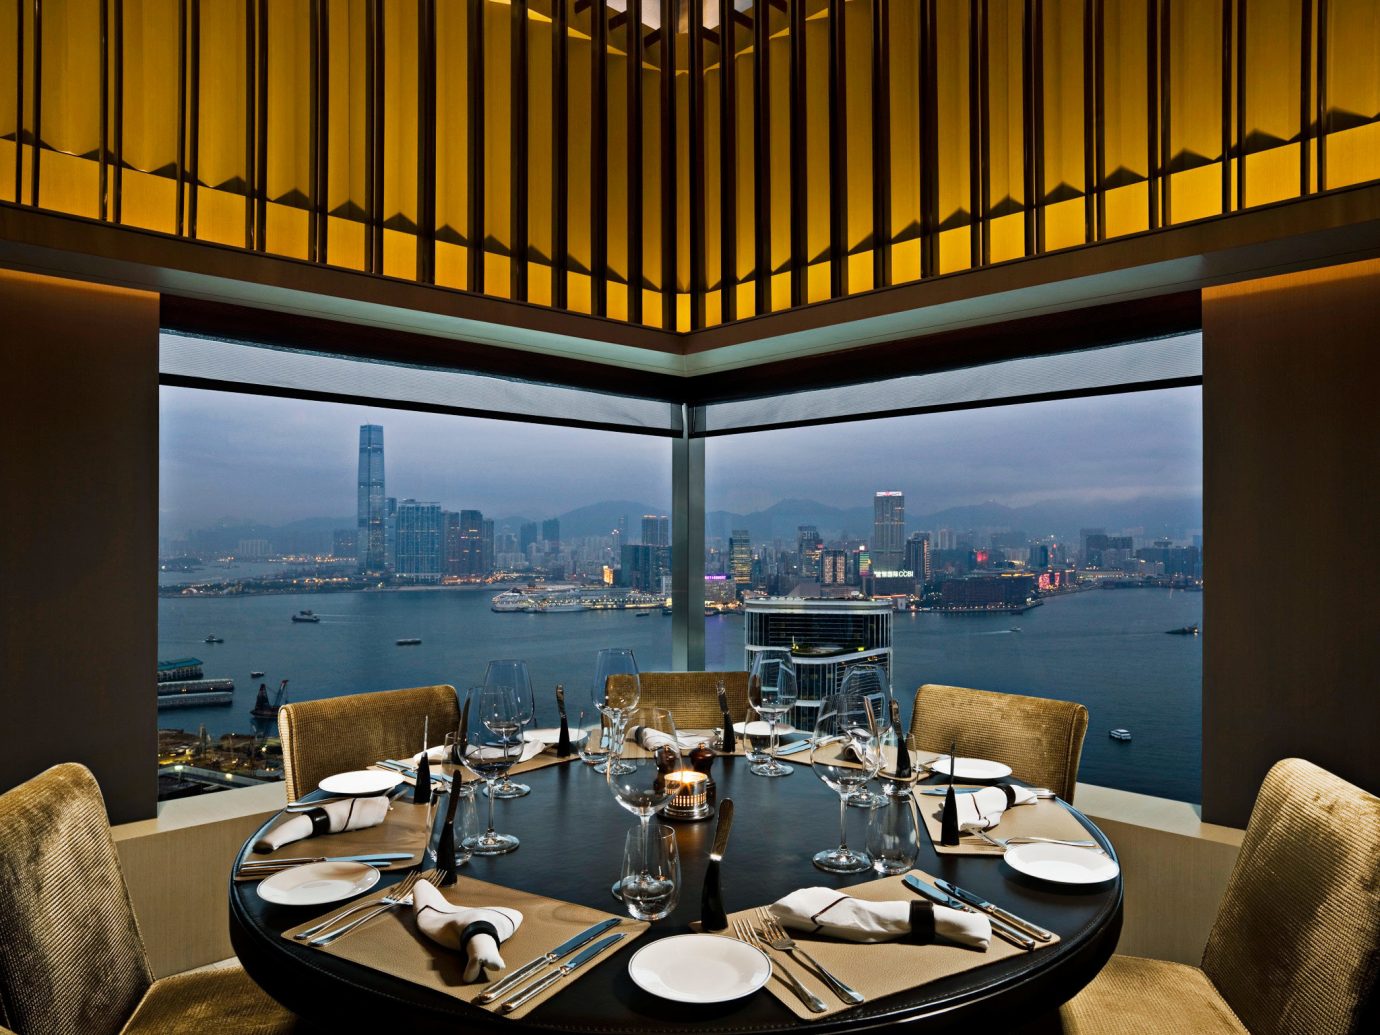 City Dining Drink Eat Food + Drink Scenic views Waterfront room dining room living room interior design restaurant estate lighting home Design Lobby window covering Suite window several